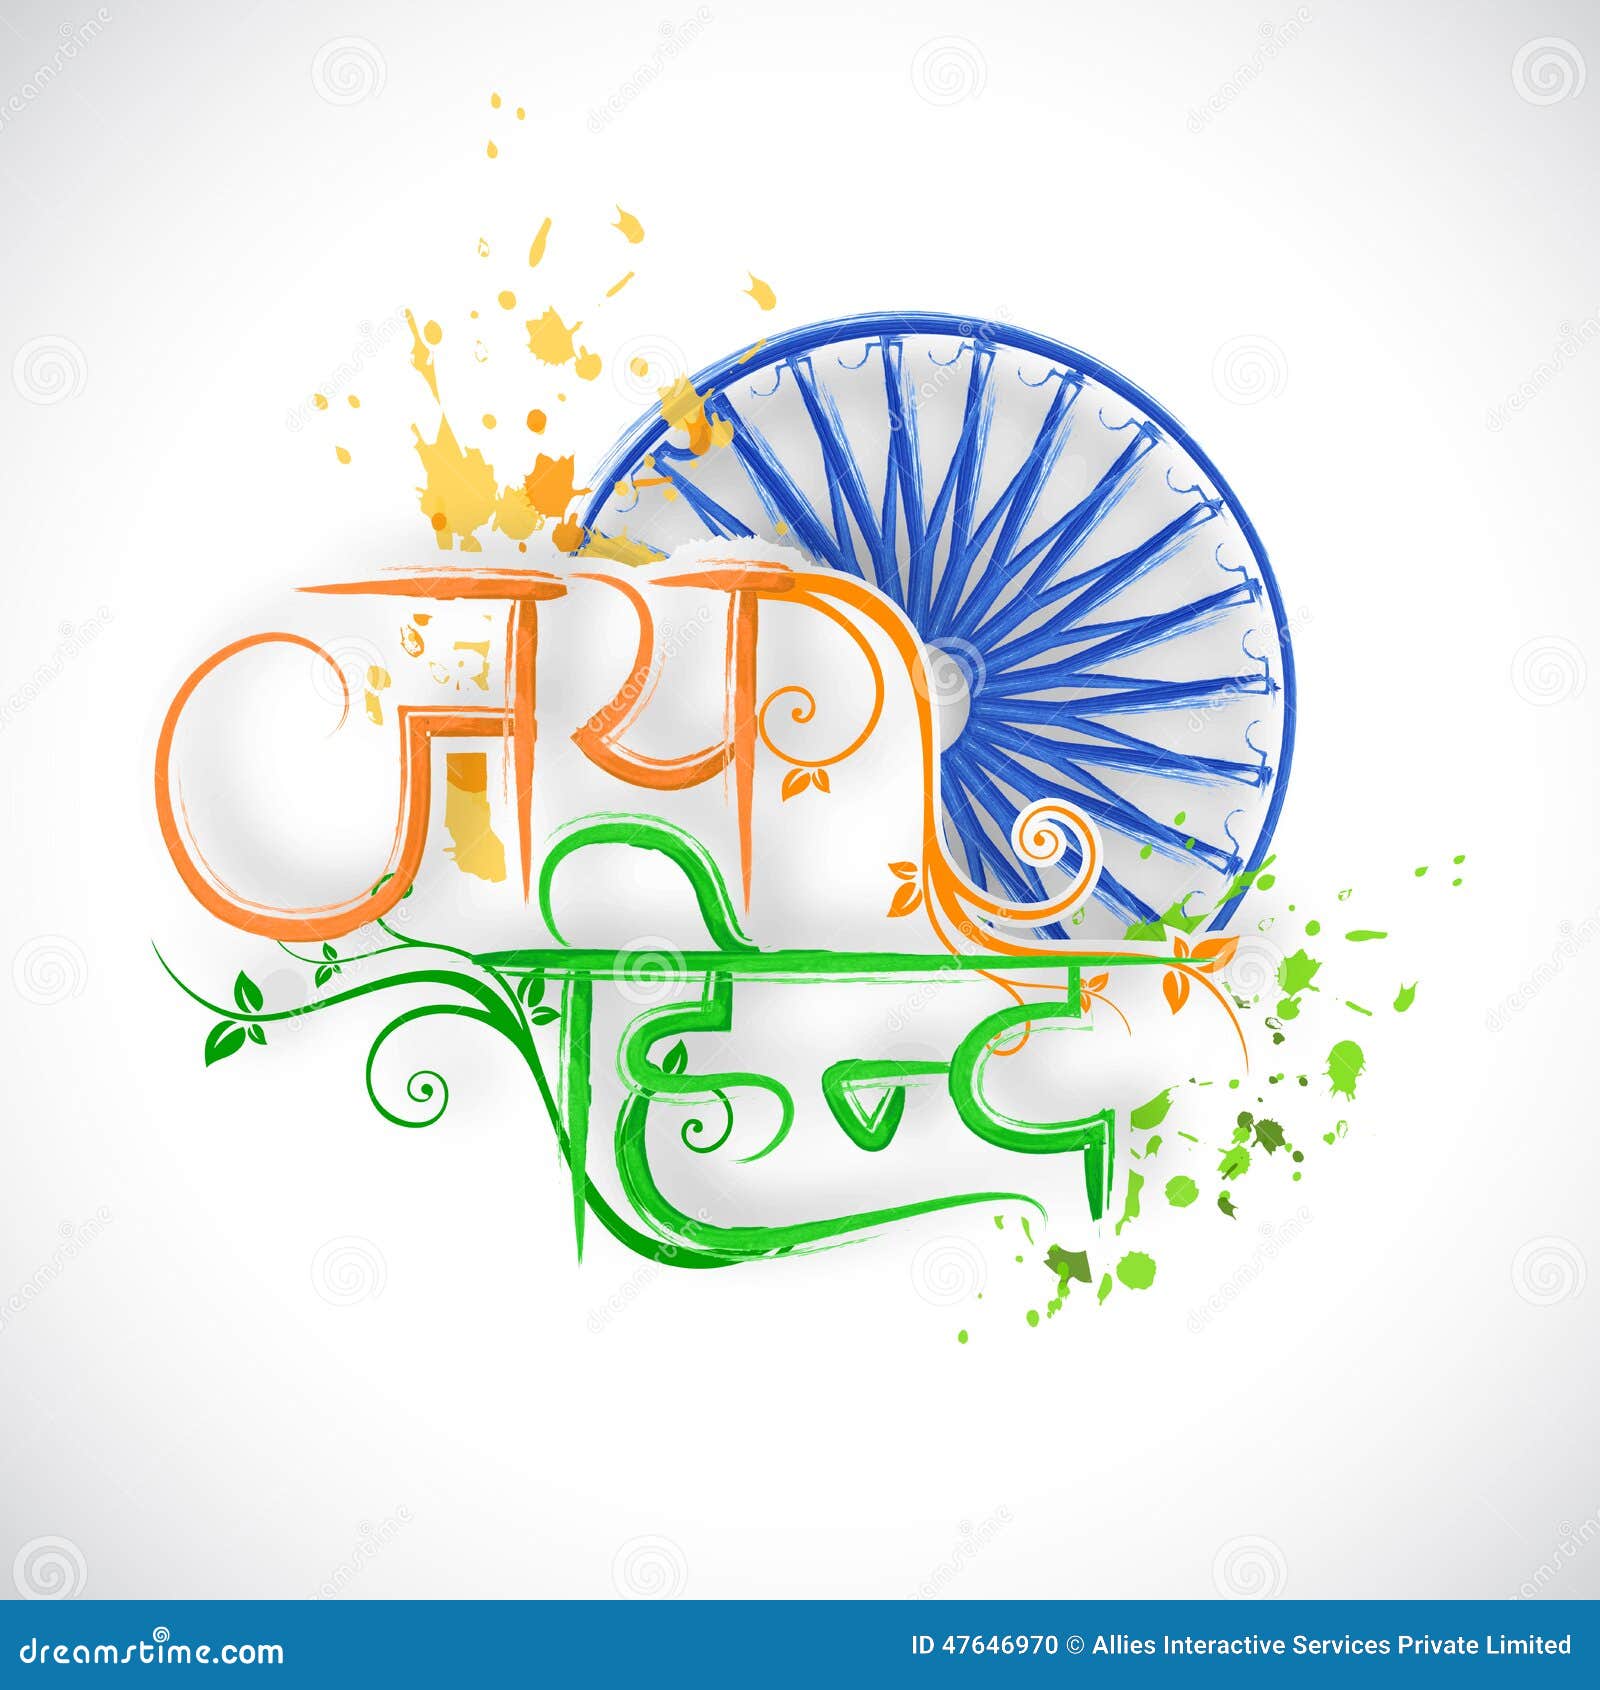 Indian Republic Day And Independence Day Celebrations Concept